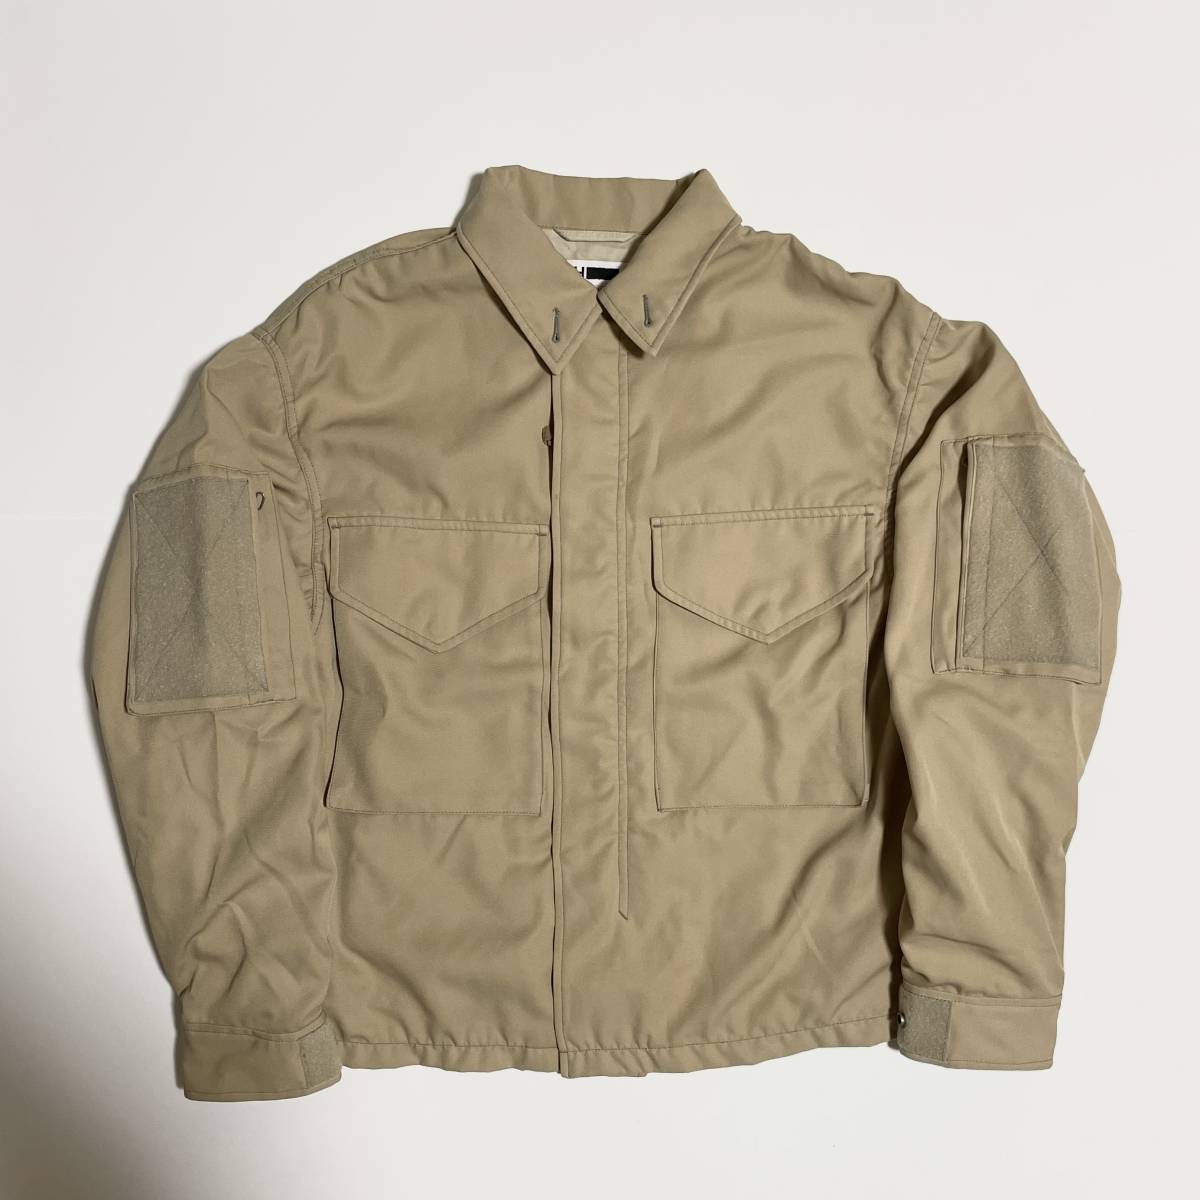 S H beauty&youth united arrows POLY TWILL FIELD JACKET ミリタリー